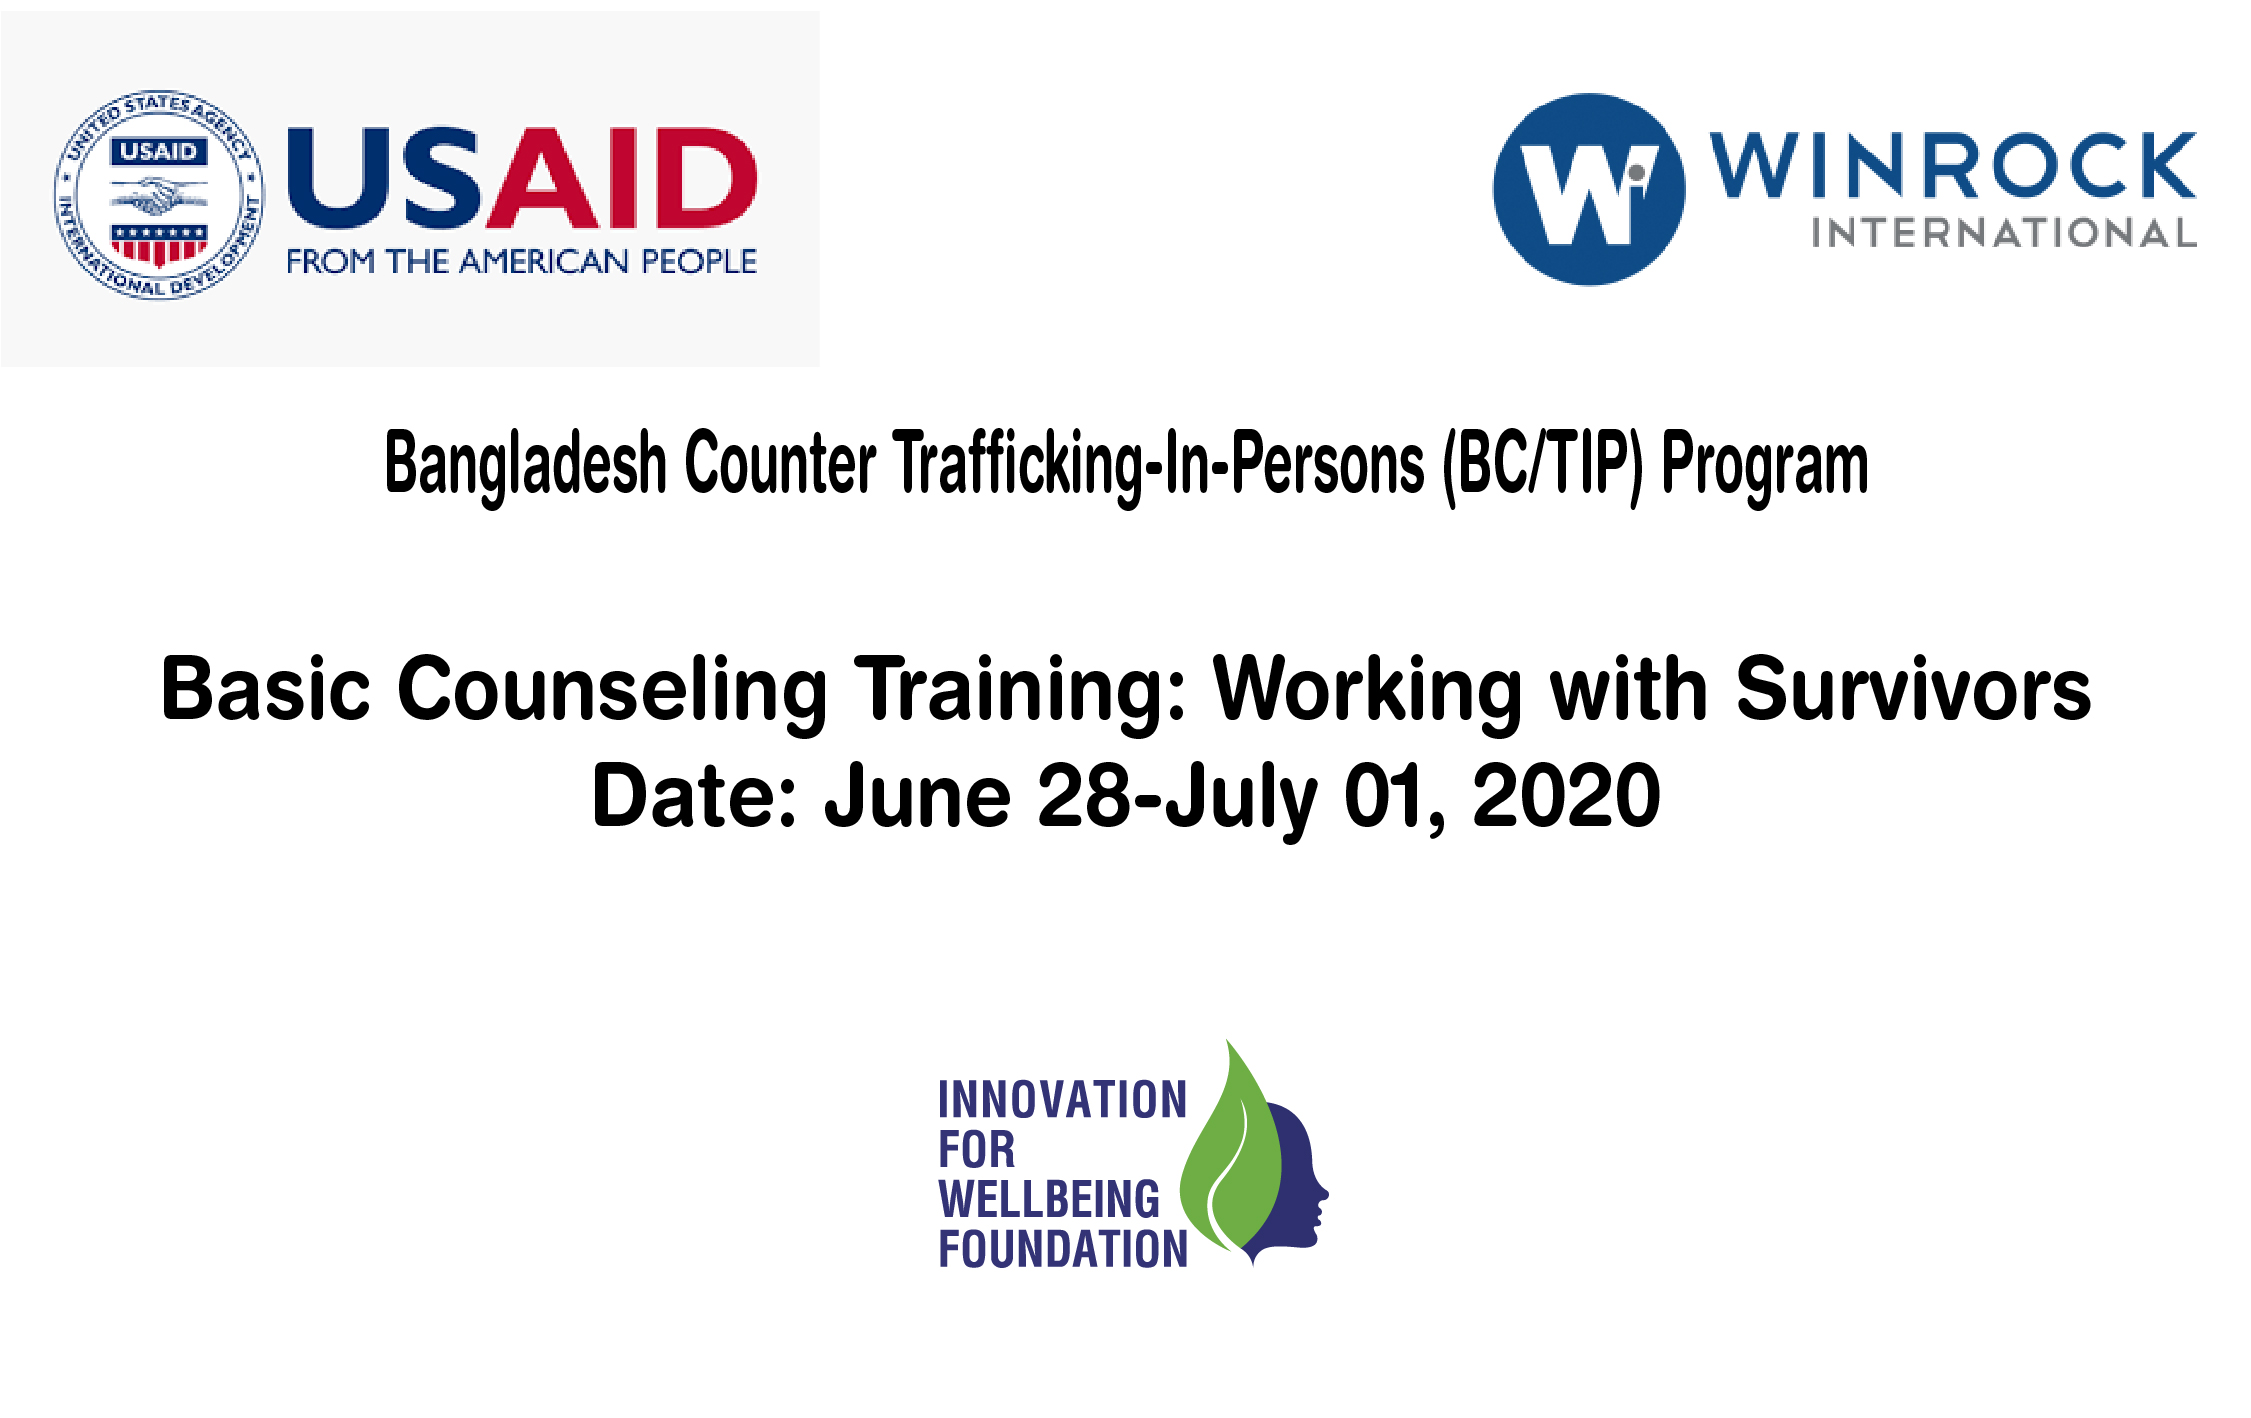 Basic Counseling Training: Working with Survivors